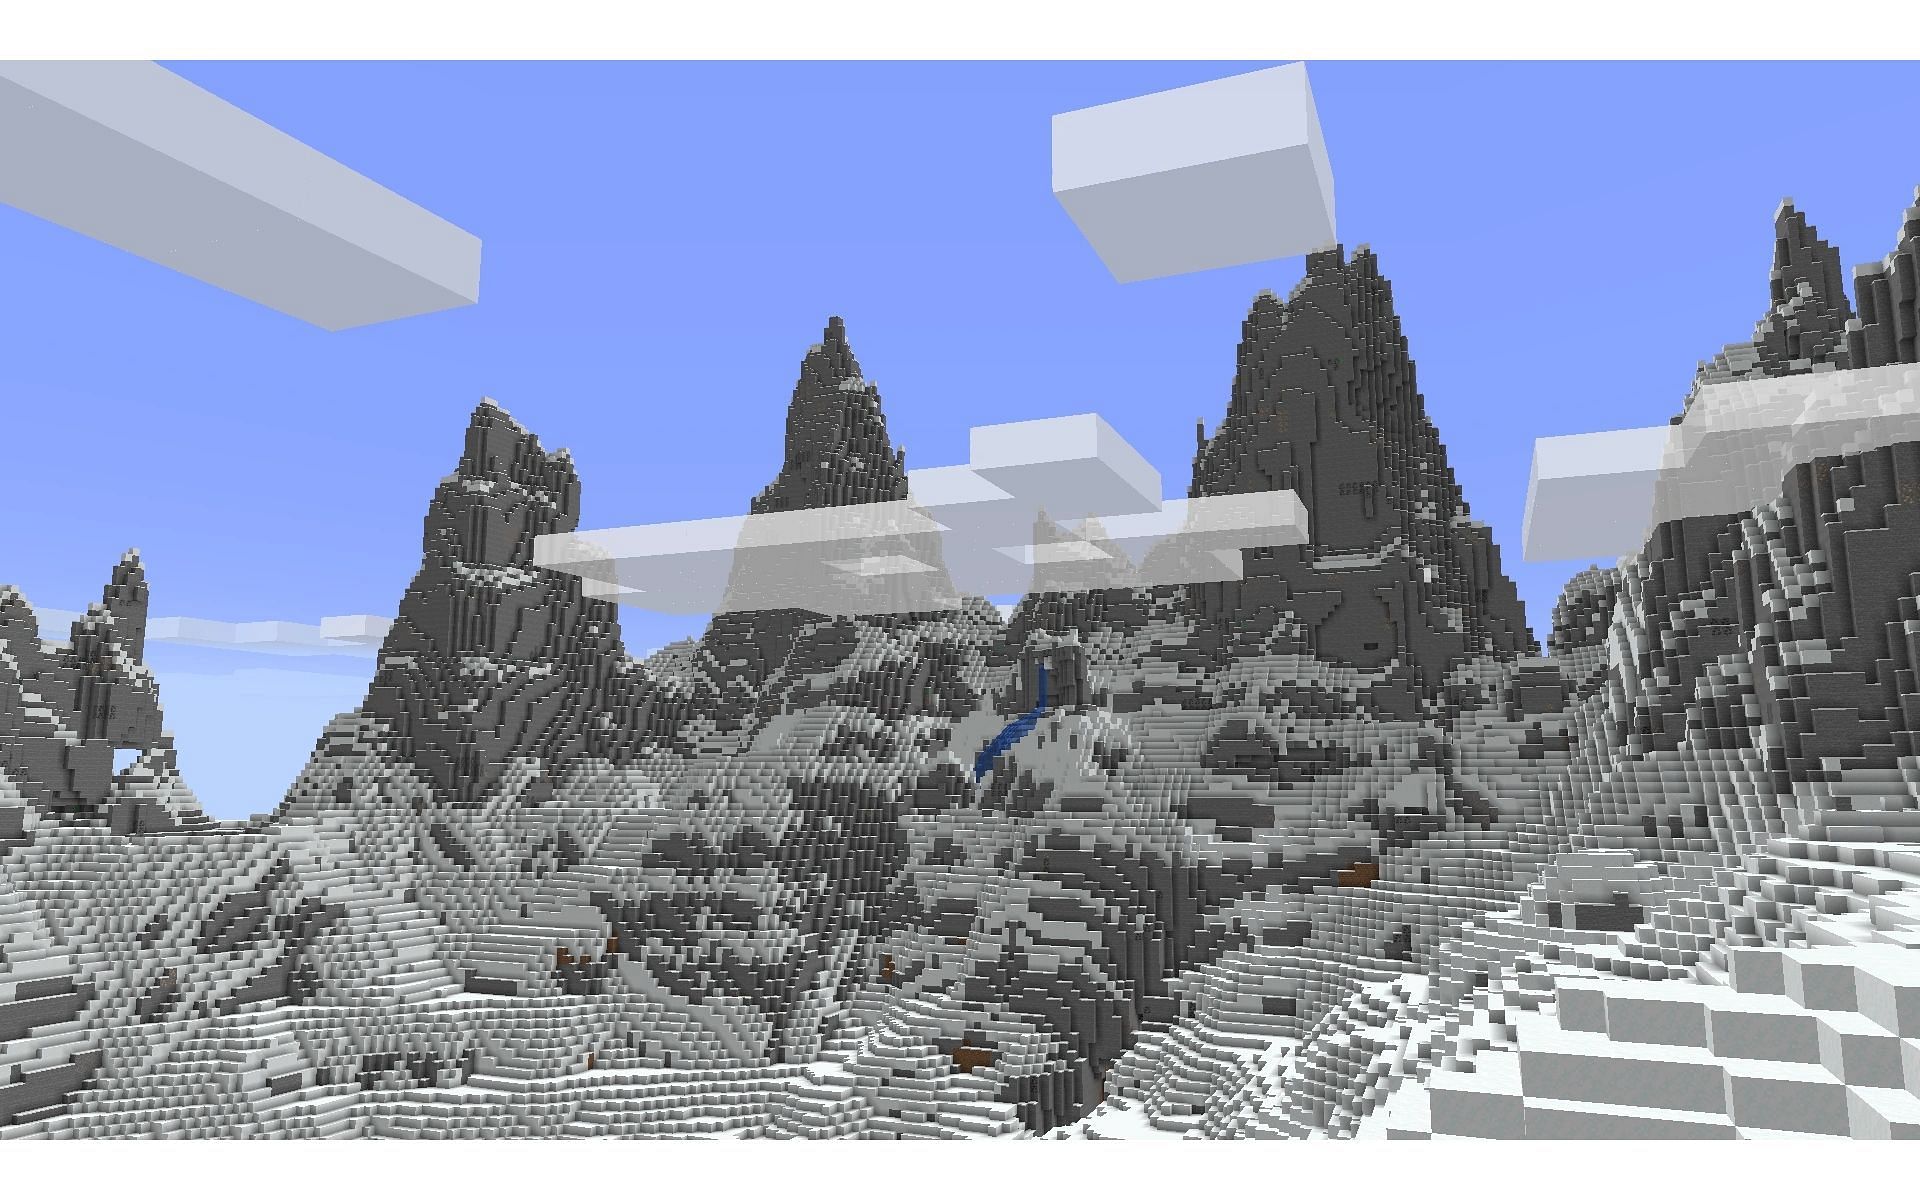 Players can find endless adventure in the mountains biomes (Image via fandom.com)